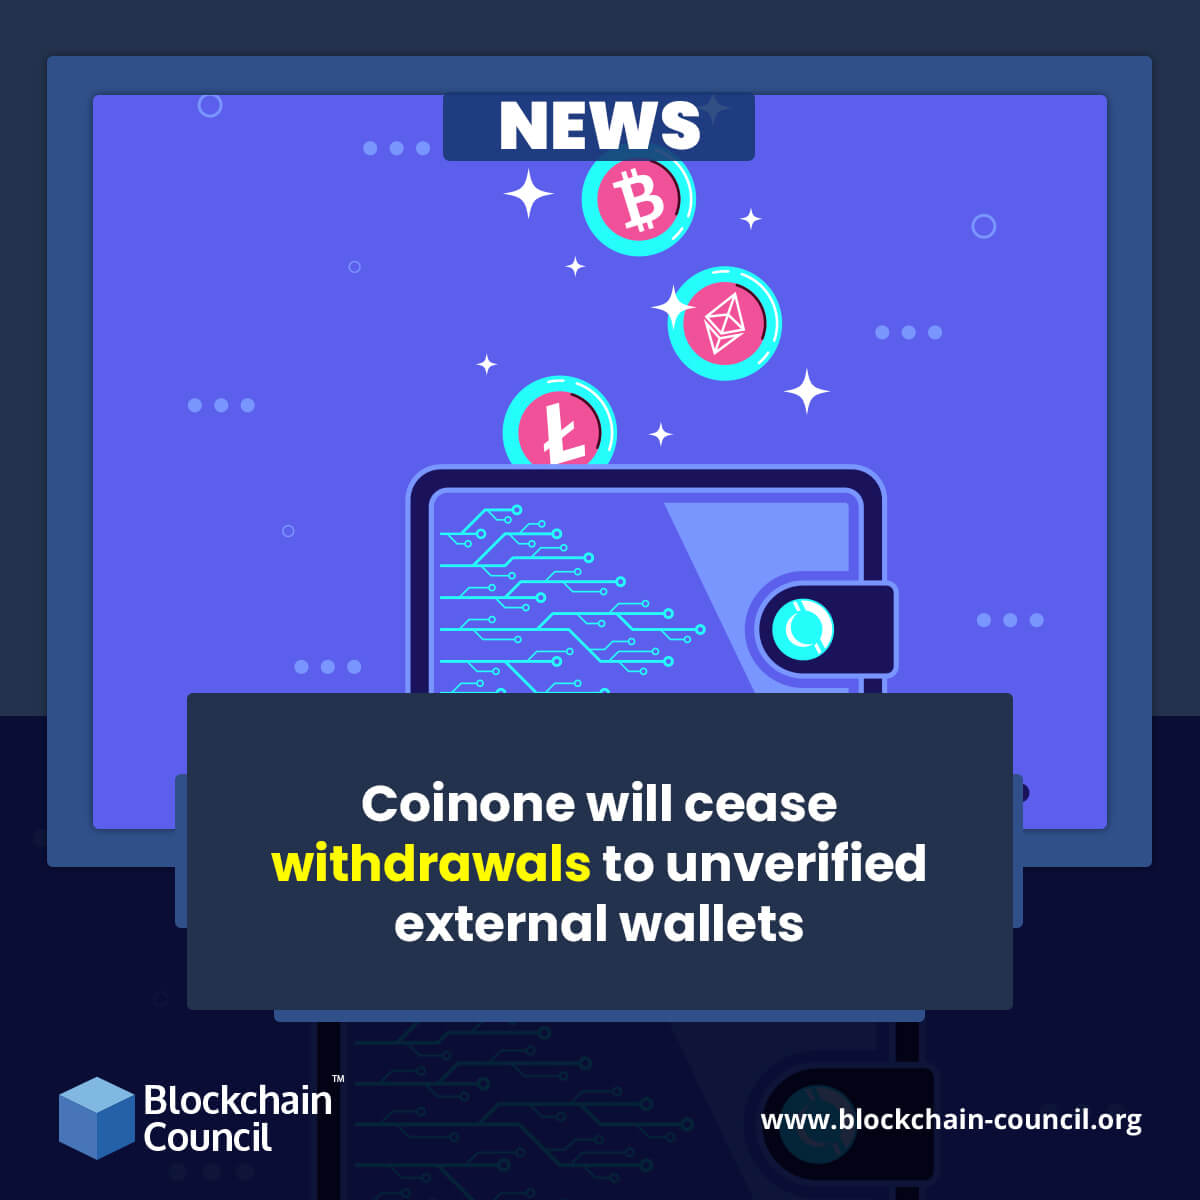 Coinone will cease withdrawals to unverified external wallets